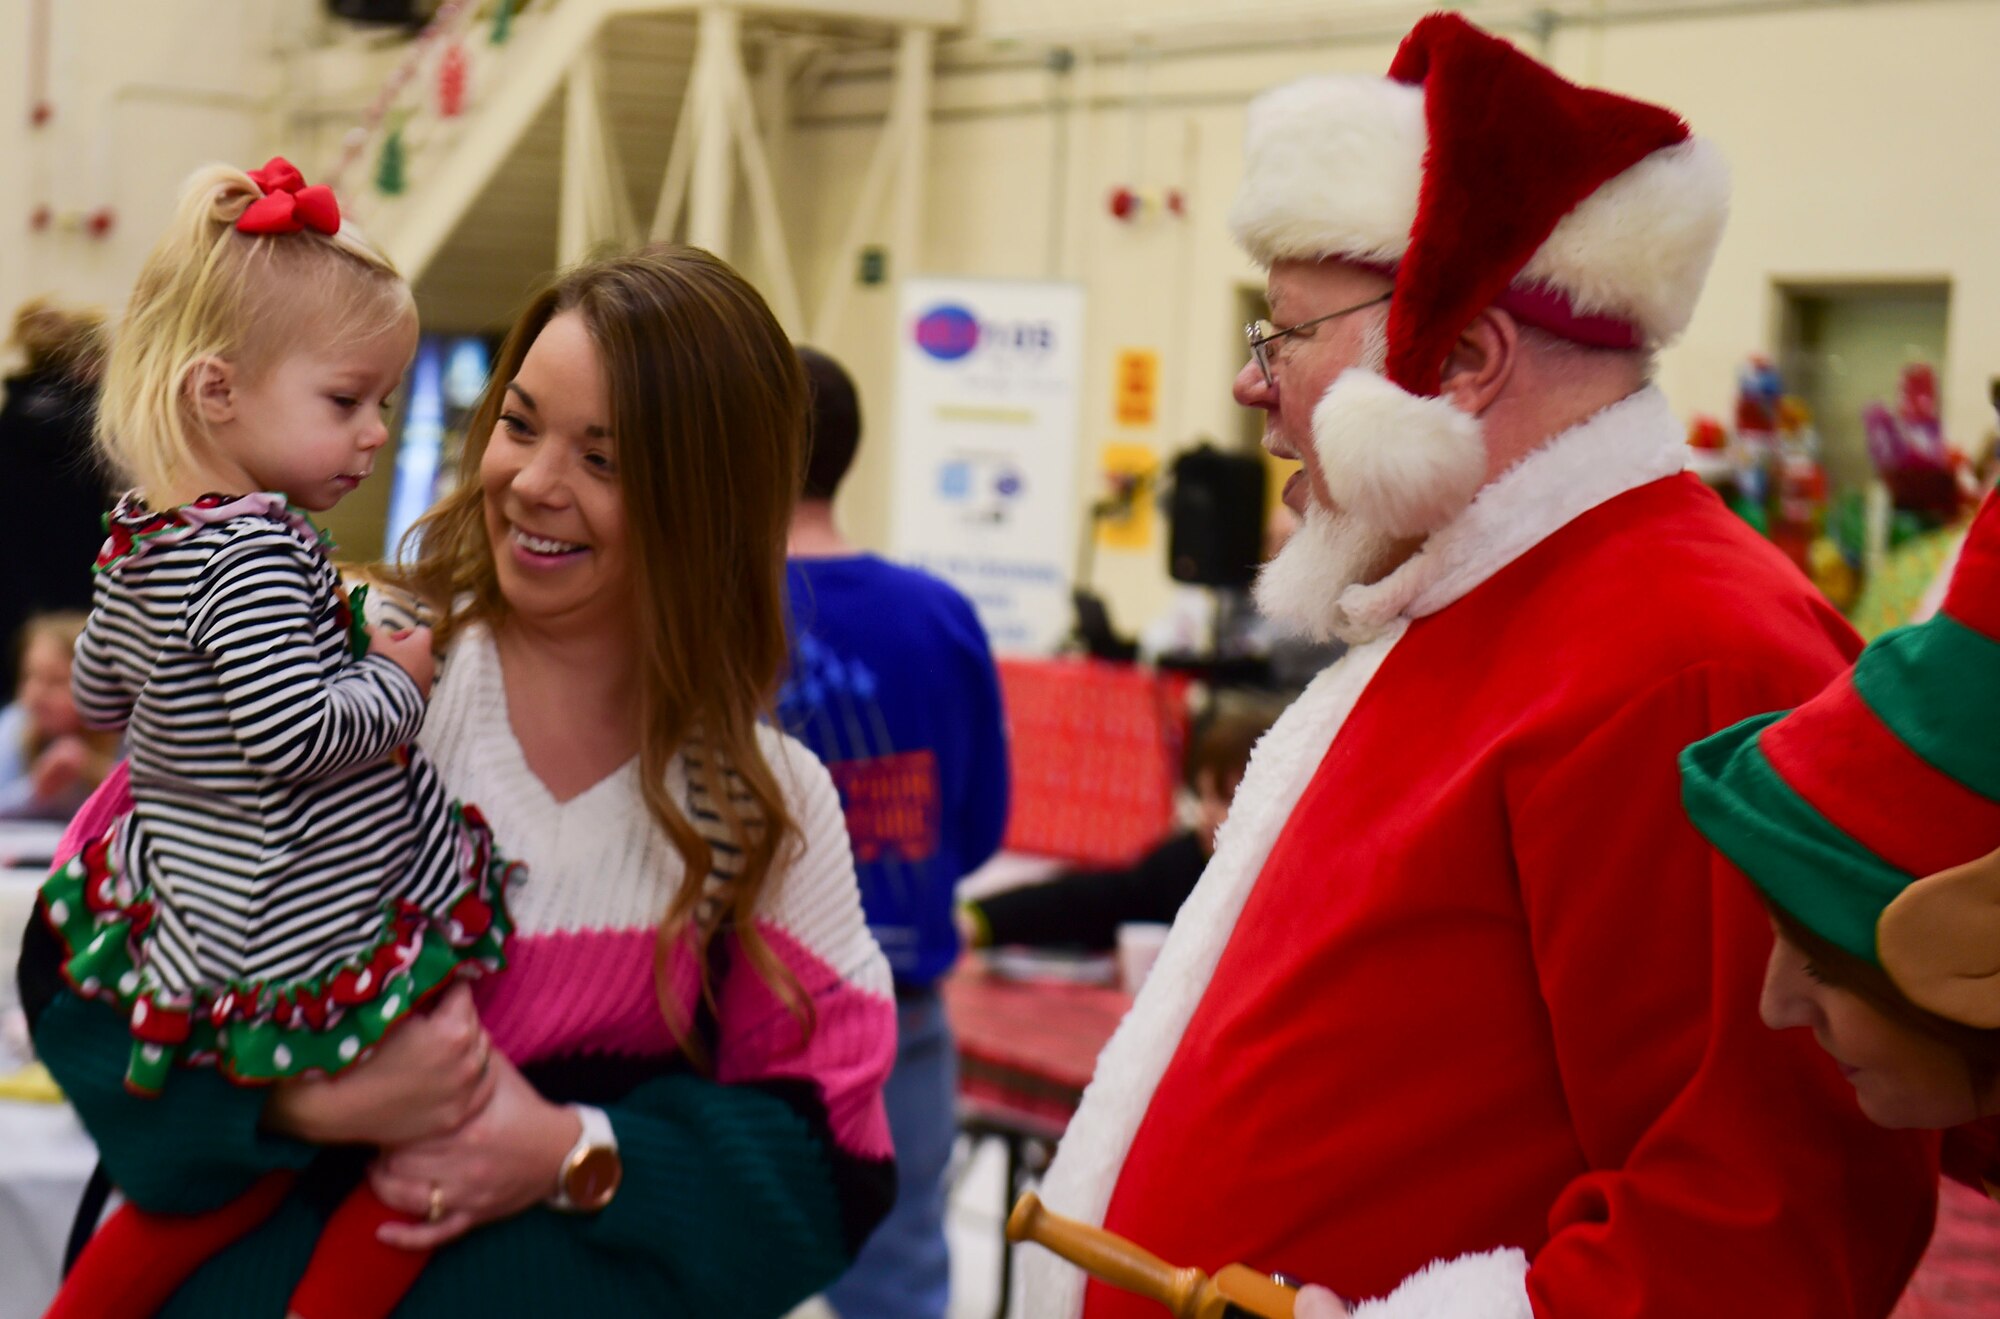 Emilia, held by her mother Jennifer Osborne, meets Santa and his elf during the Kids’ Christmas Party at Grissom Air Reserve Base, Indiana, Dec. 7, 2019.  The 434th Force Support Squadron Airman and Family Readiness Center transformed Dock 1 into a Christmas wonderland complete with cookie decorating, toys and hot cocoa.  (U.S. Air Force Photo by Staff Sgt. Chris Massey)